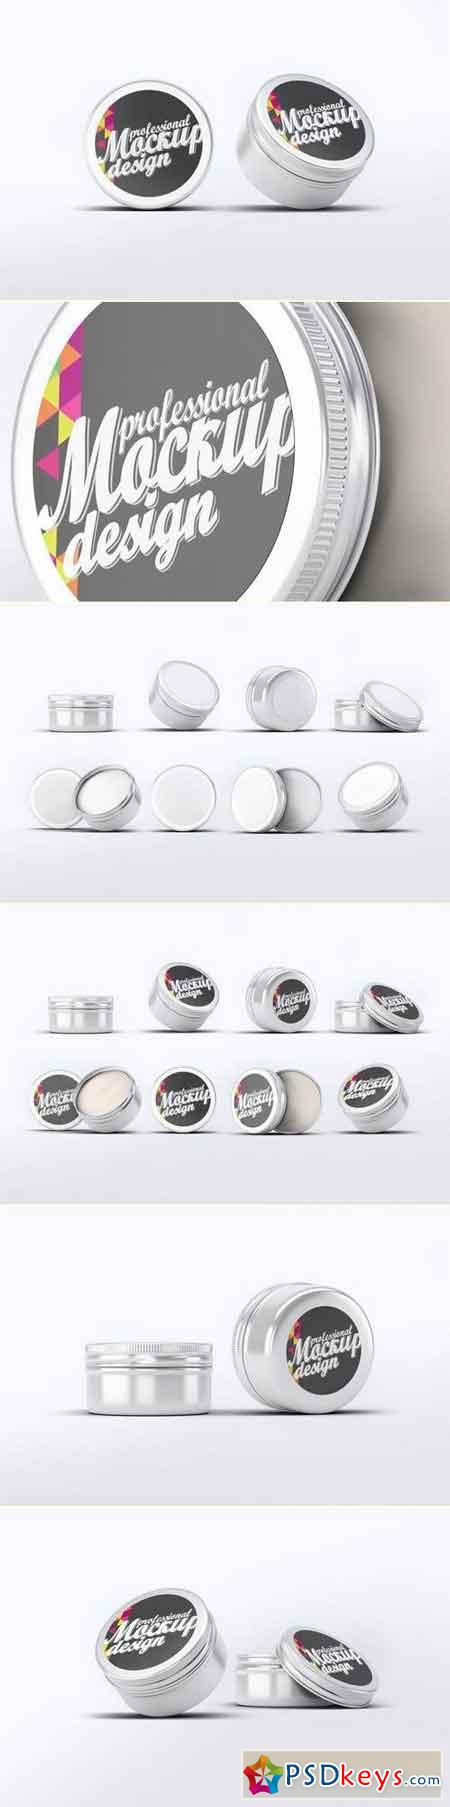 Round Tin Can Mock-Up